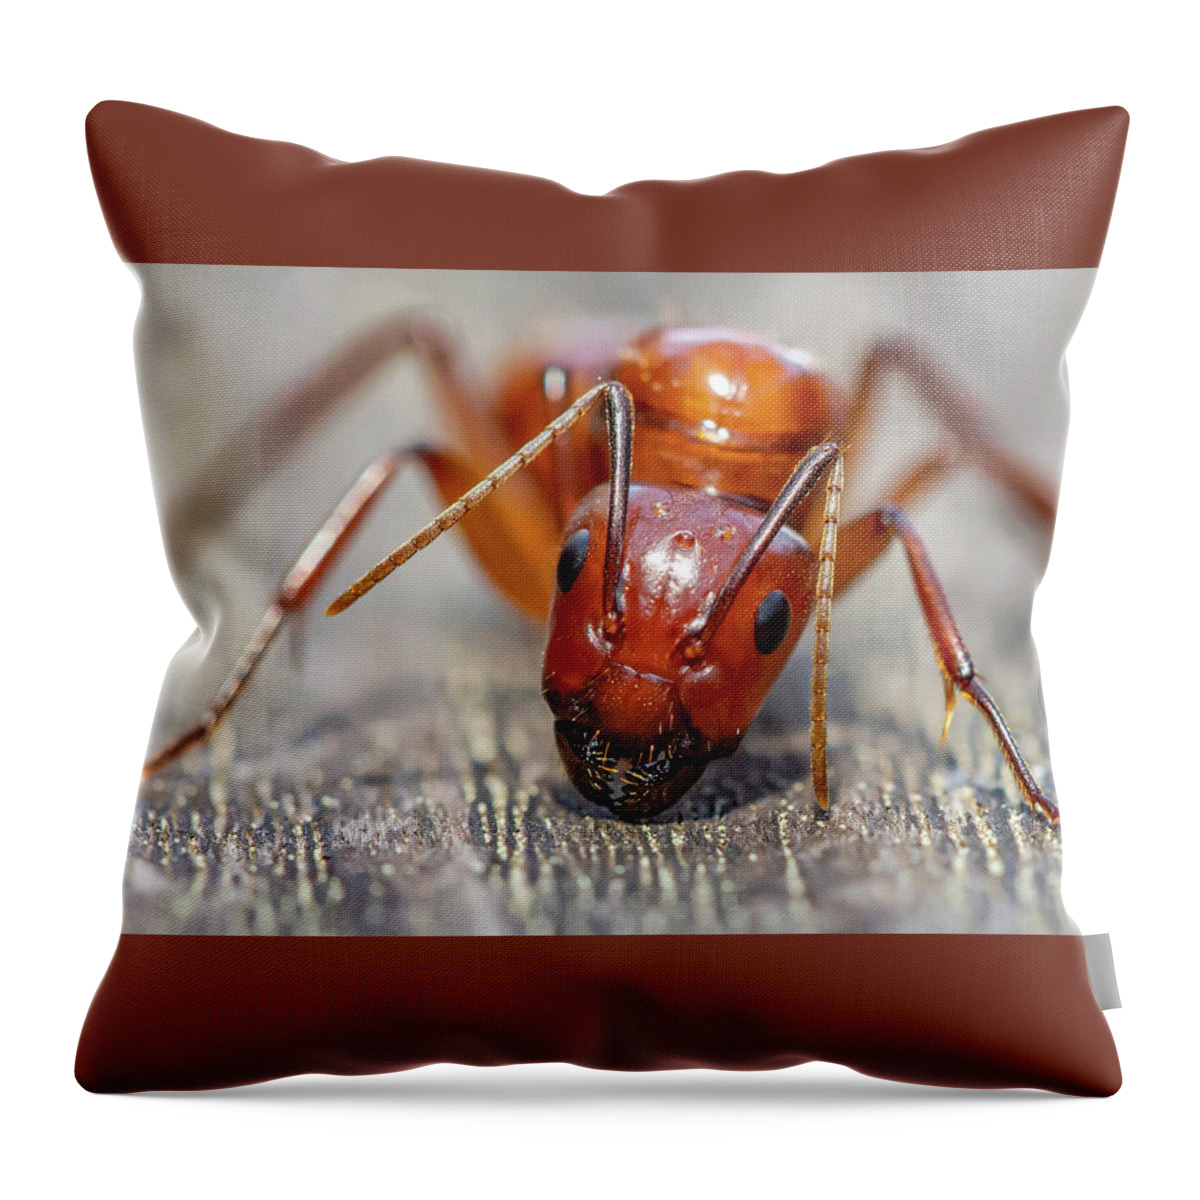 Ant Throw Pillow featuring the photograph Ant by Anna Rumiantseva